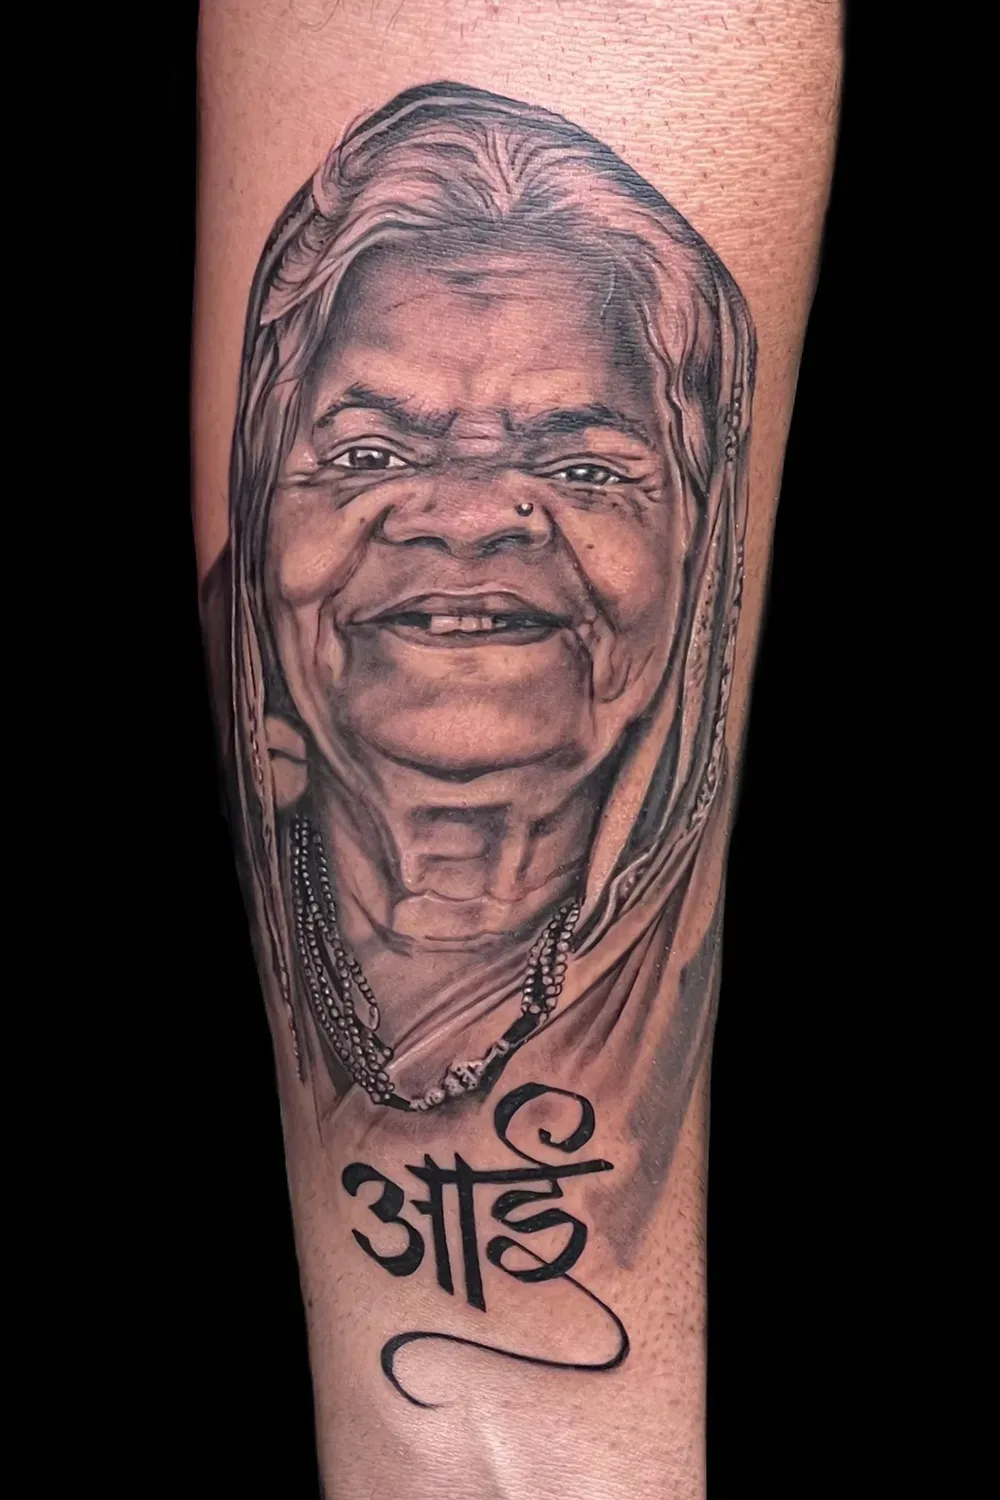 Aliens Tattoo - Nothing is harder than drawing a perfect portrait on skin  with ink and a needle. Take a look at this amazing portrait tattoo by Parth  Vasani at Aliens Tattoo